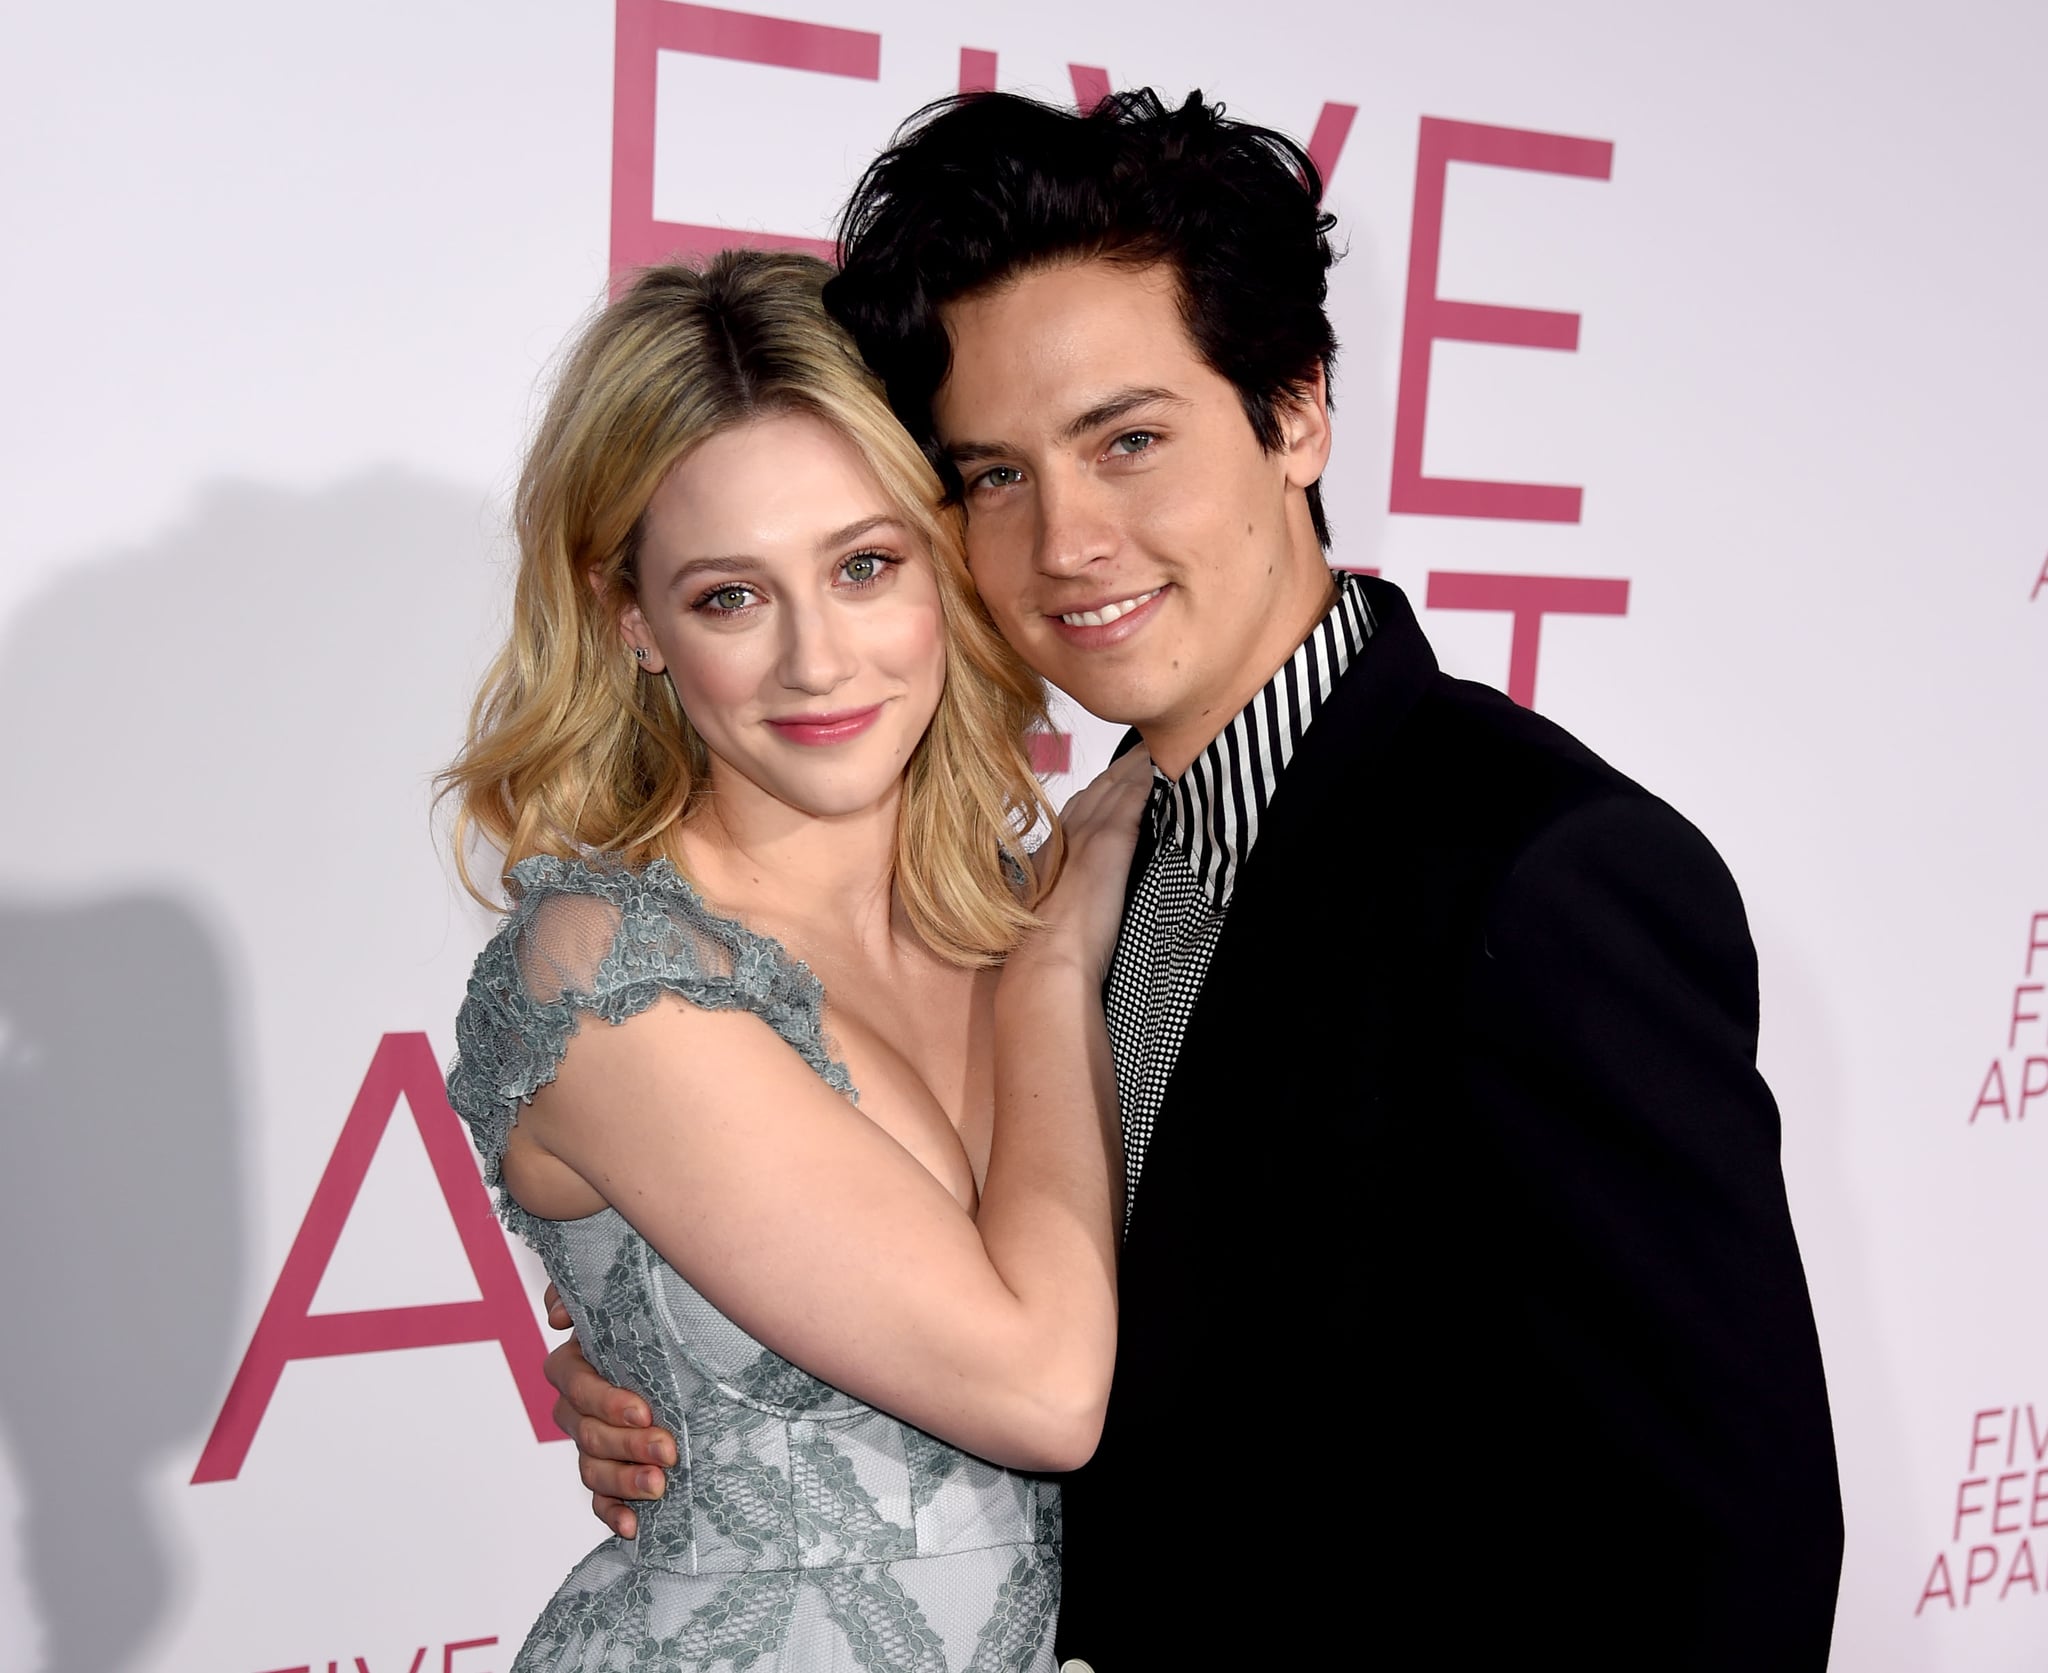 LOS ANGELES, CALIFORNIA - MARCH 07: Lili Reinhart (L) and Cole Sprouse arrive at the premiere of CBS Films' 